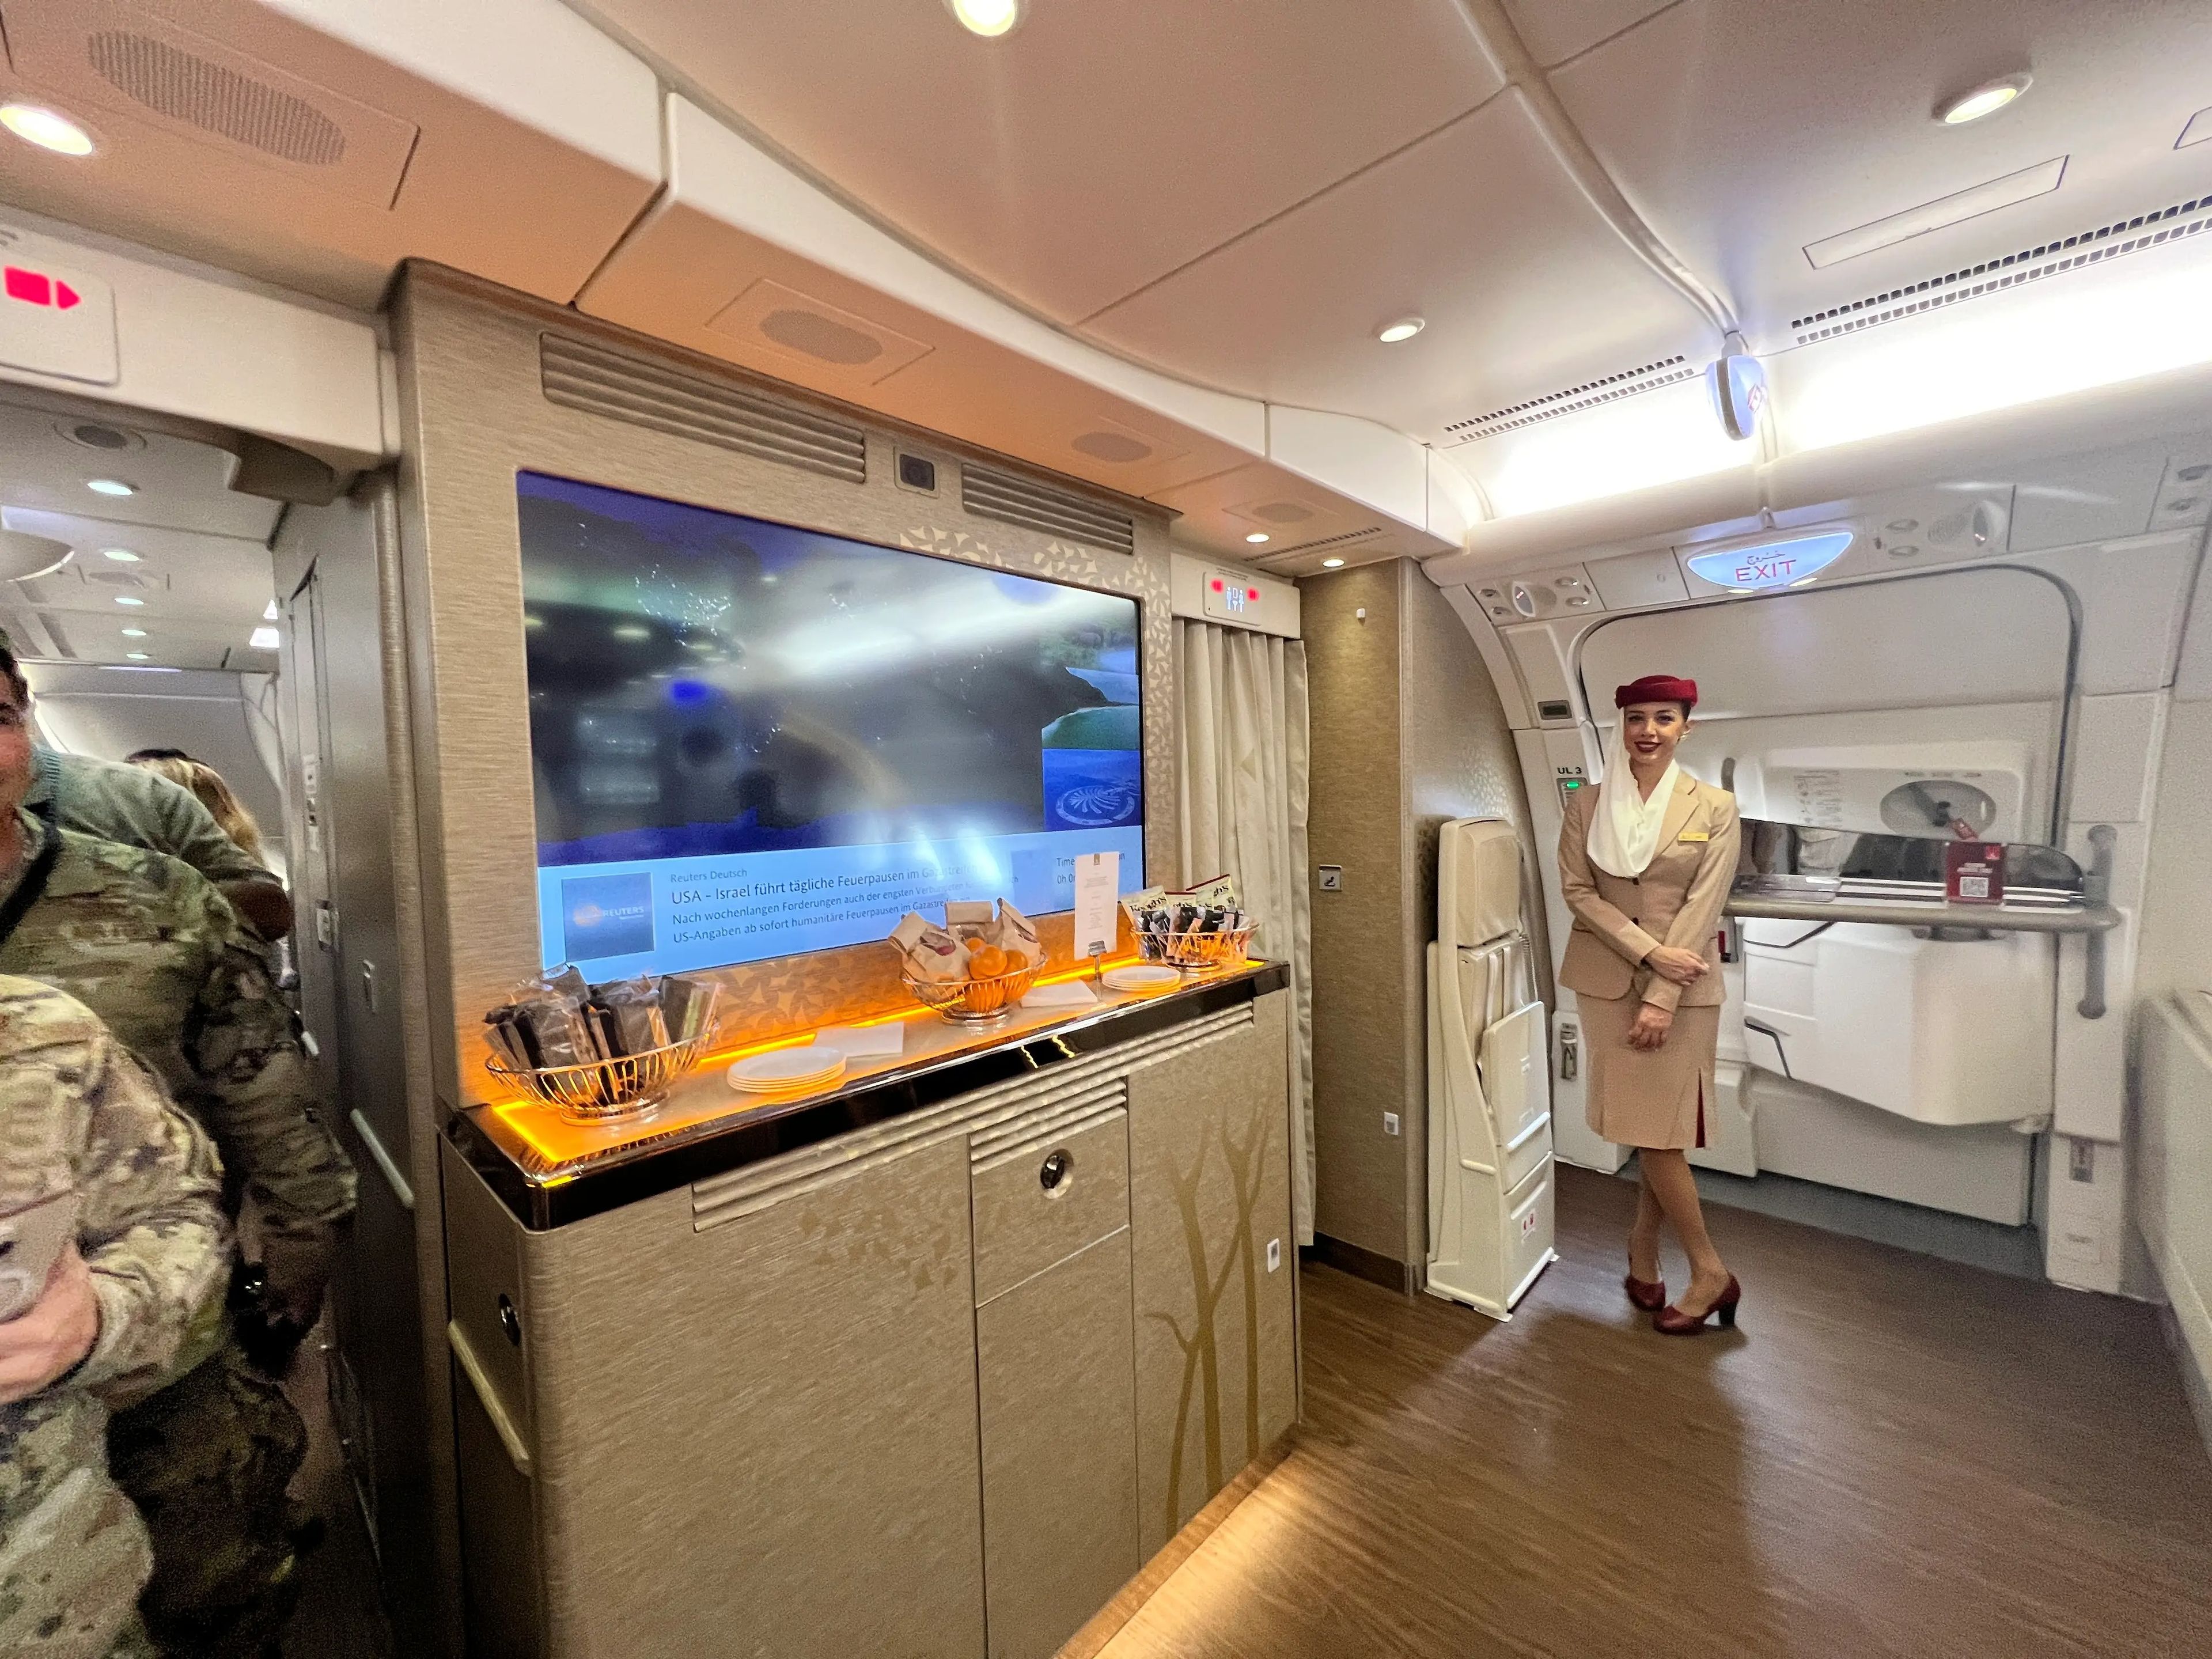 A reverse view of the bar area in an Emirates A380 shows a TV screen above a cabinet, and a flight attendant standing by the emergency exit.